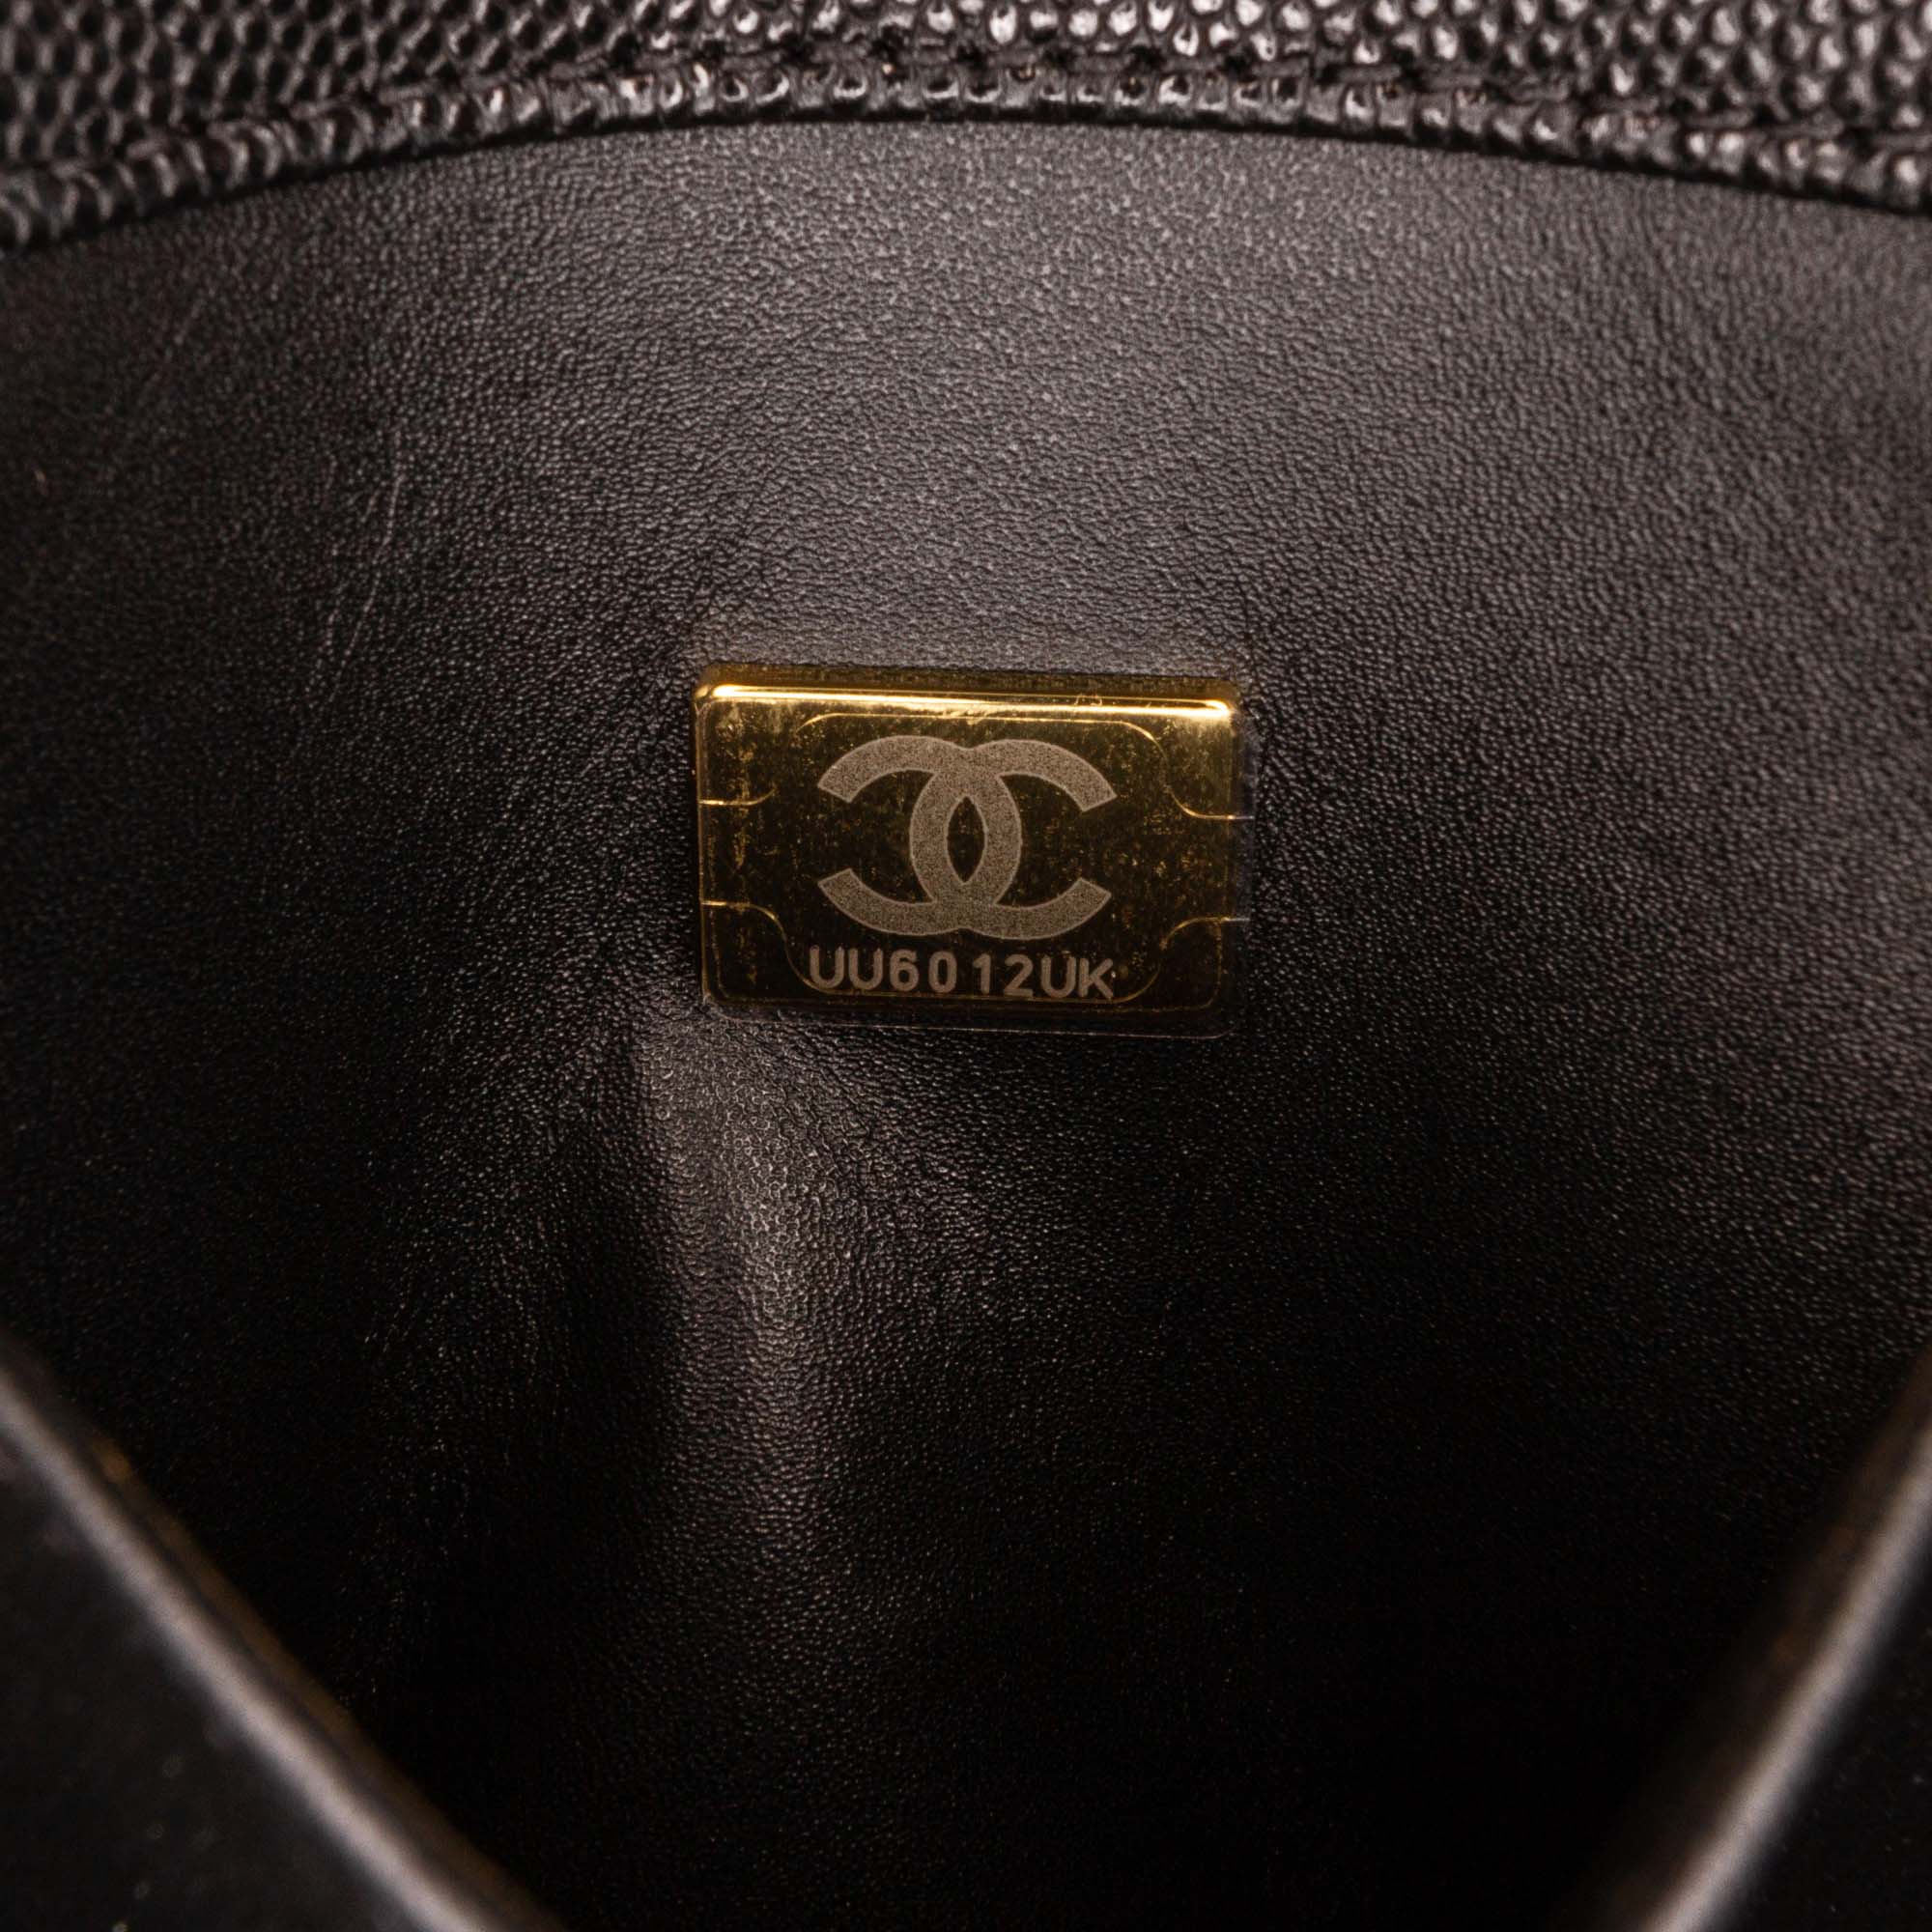 Chanel Coco First Flap Bag